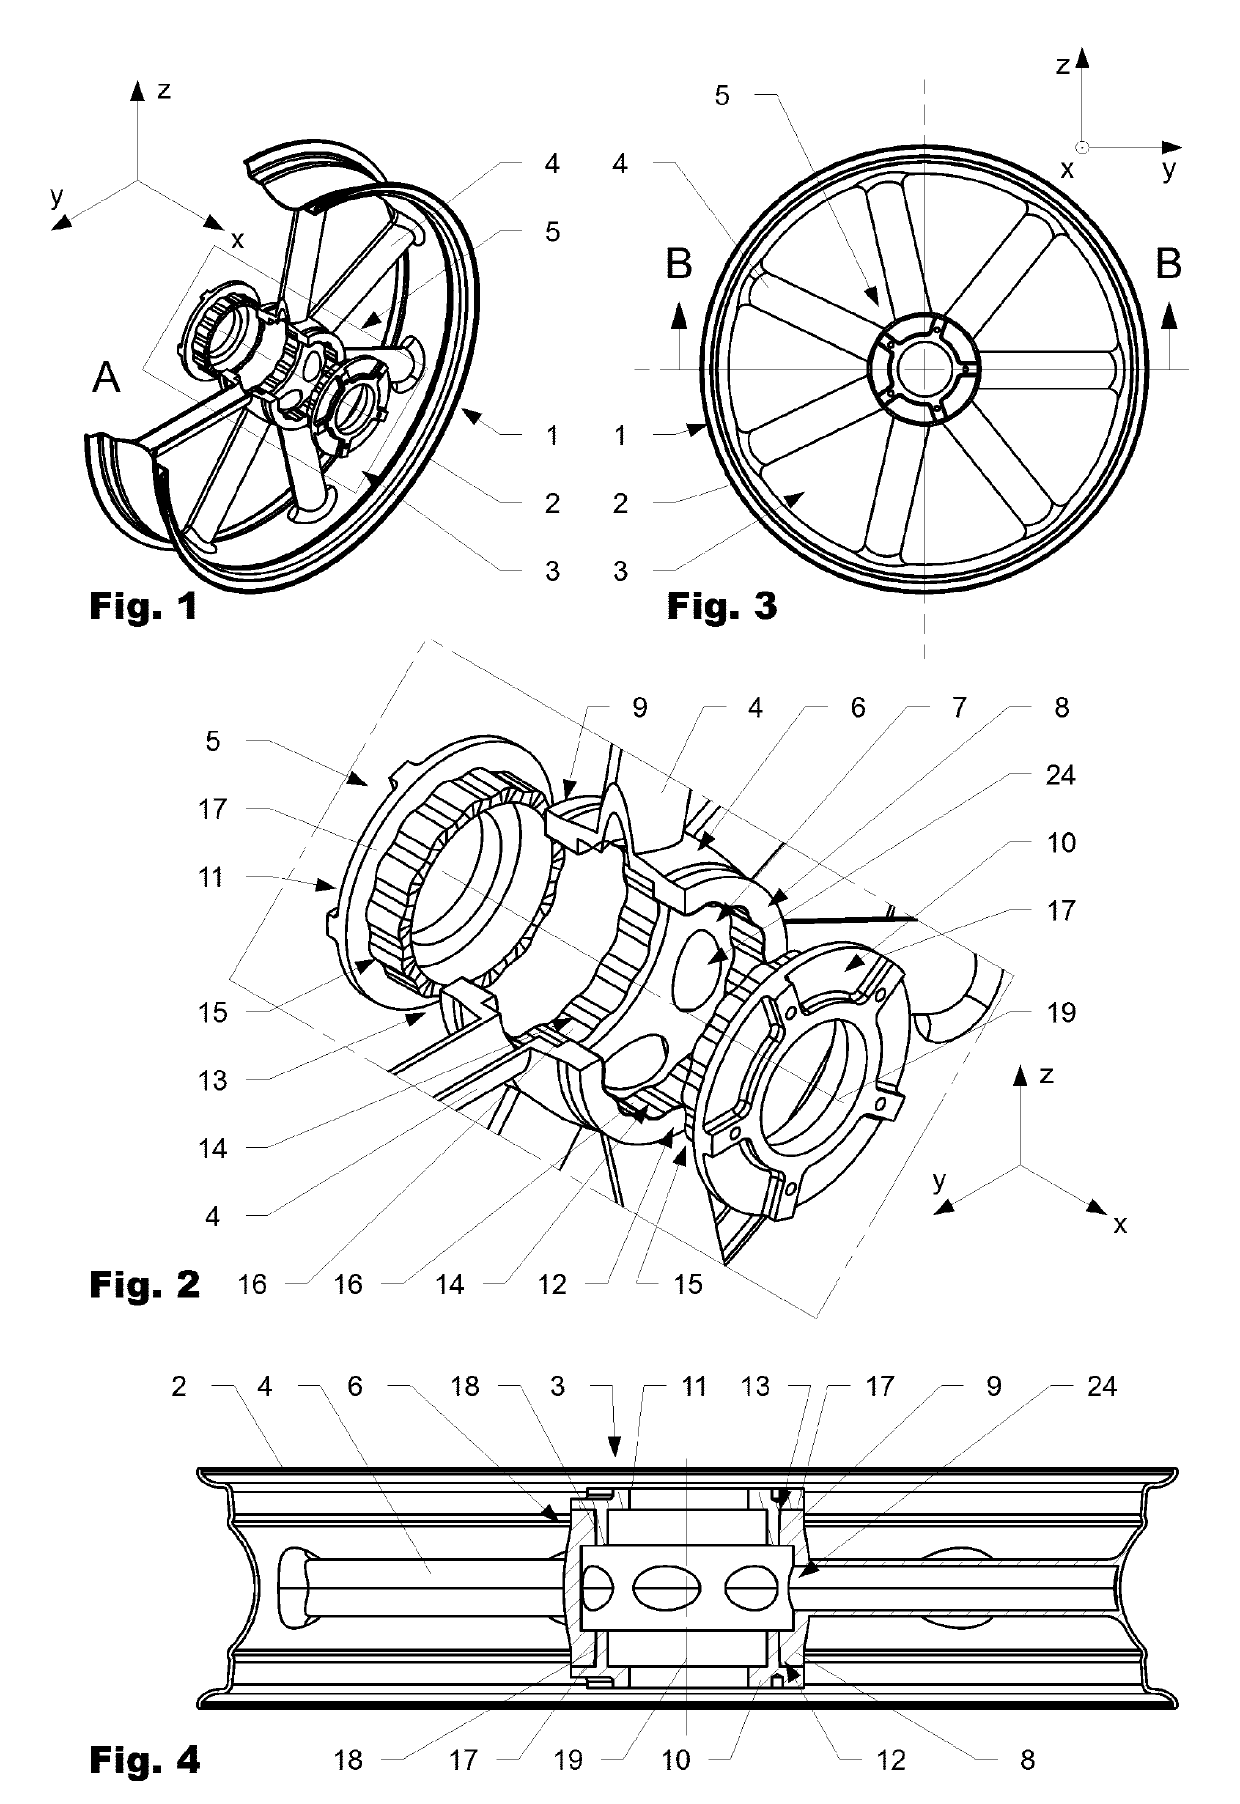 Wheel made out of fiber reinforced material and procedure to make such wheel